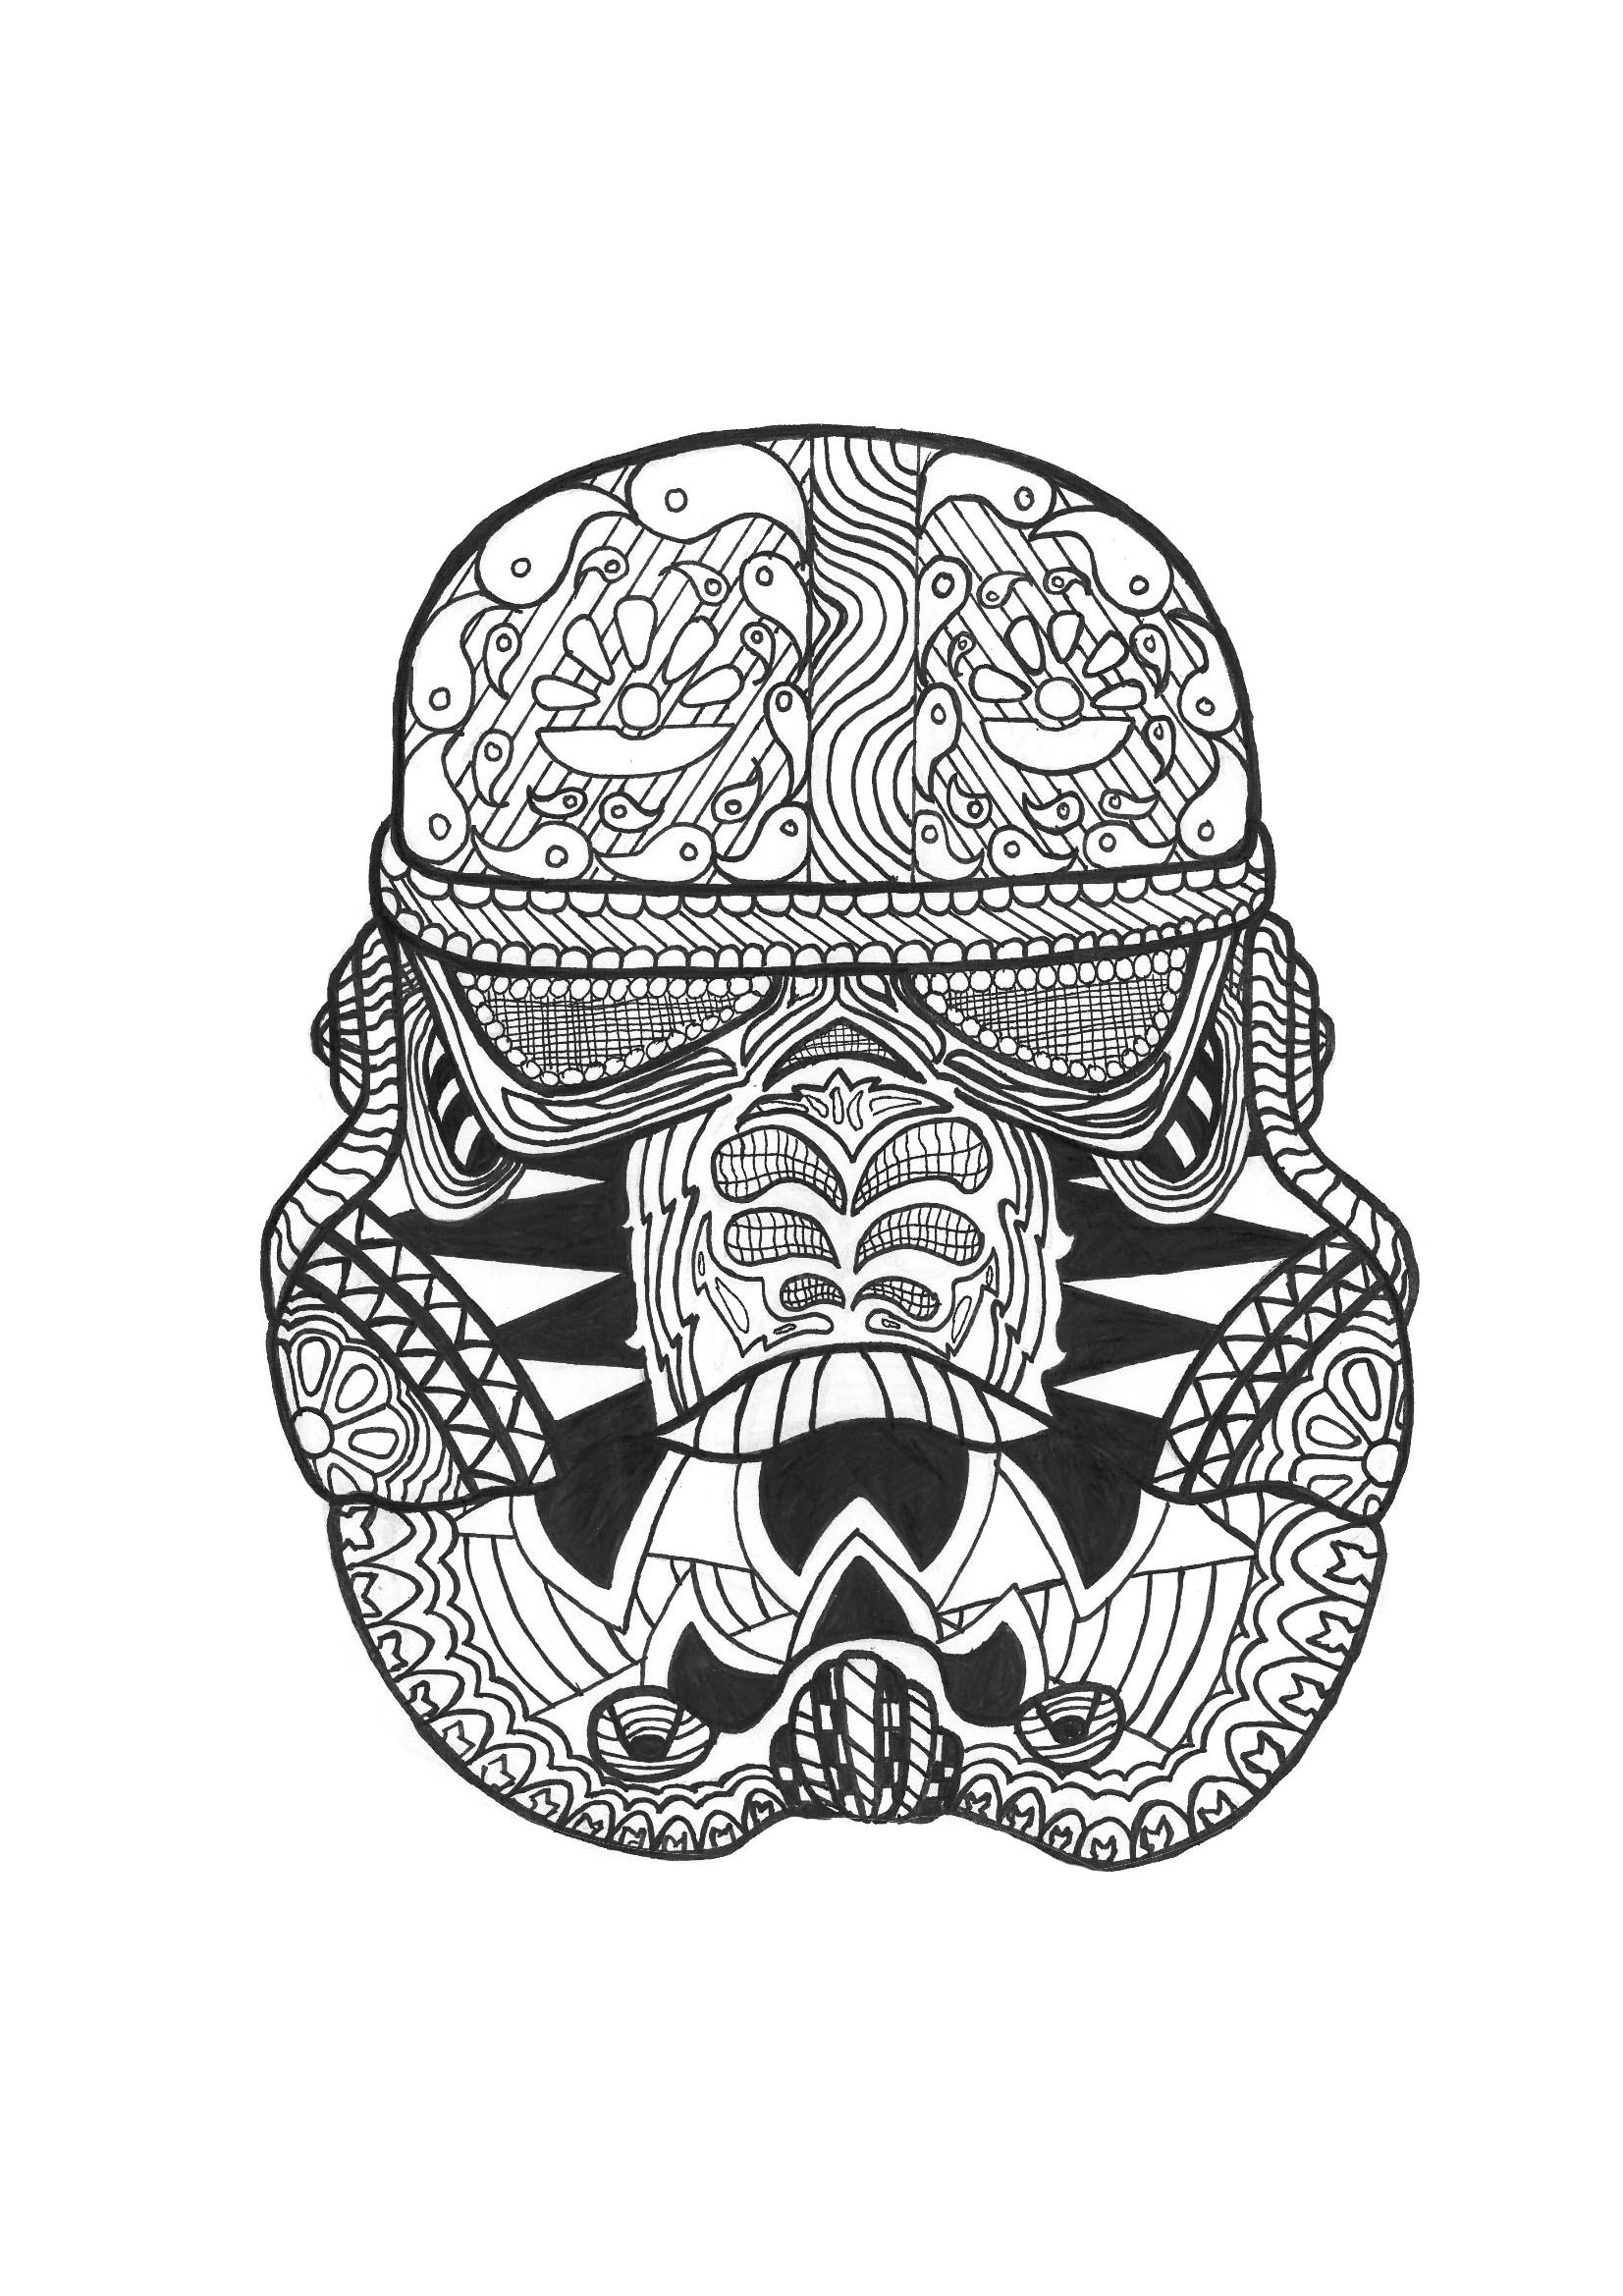 Star wars to download - Star Wars Kids Coloring Pages